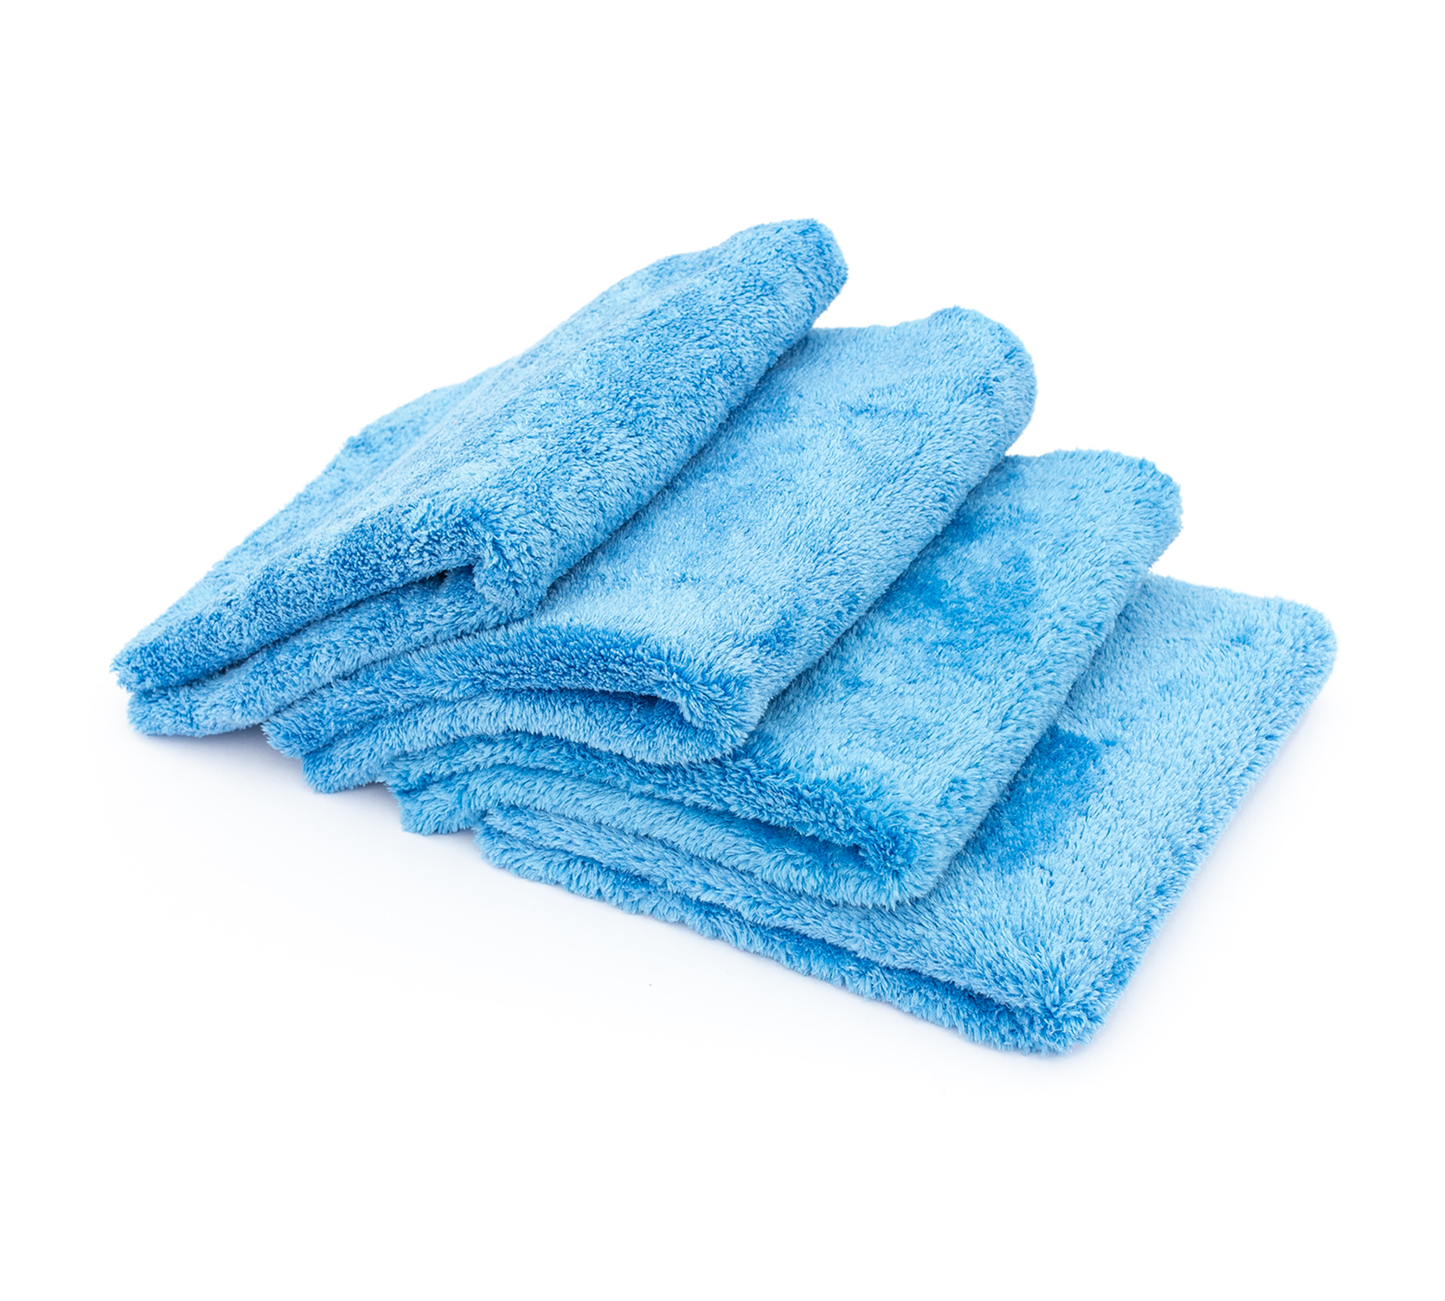 Prestige XL Microfibre Cleaning Towels, Pack of 30 